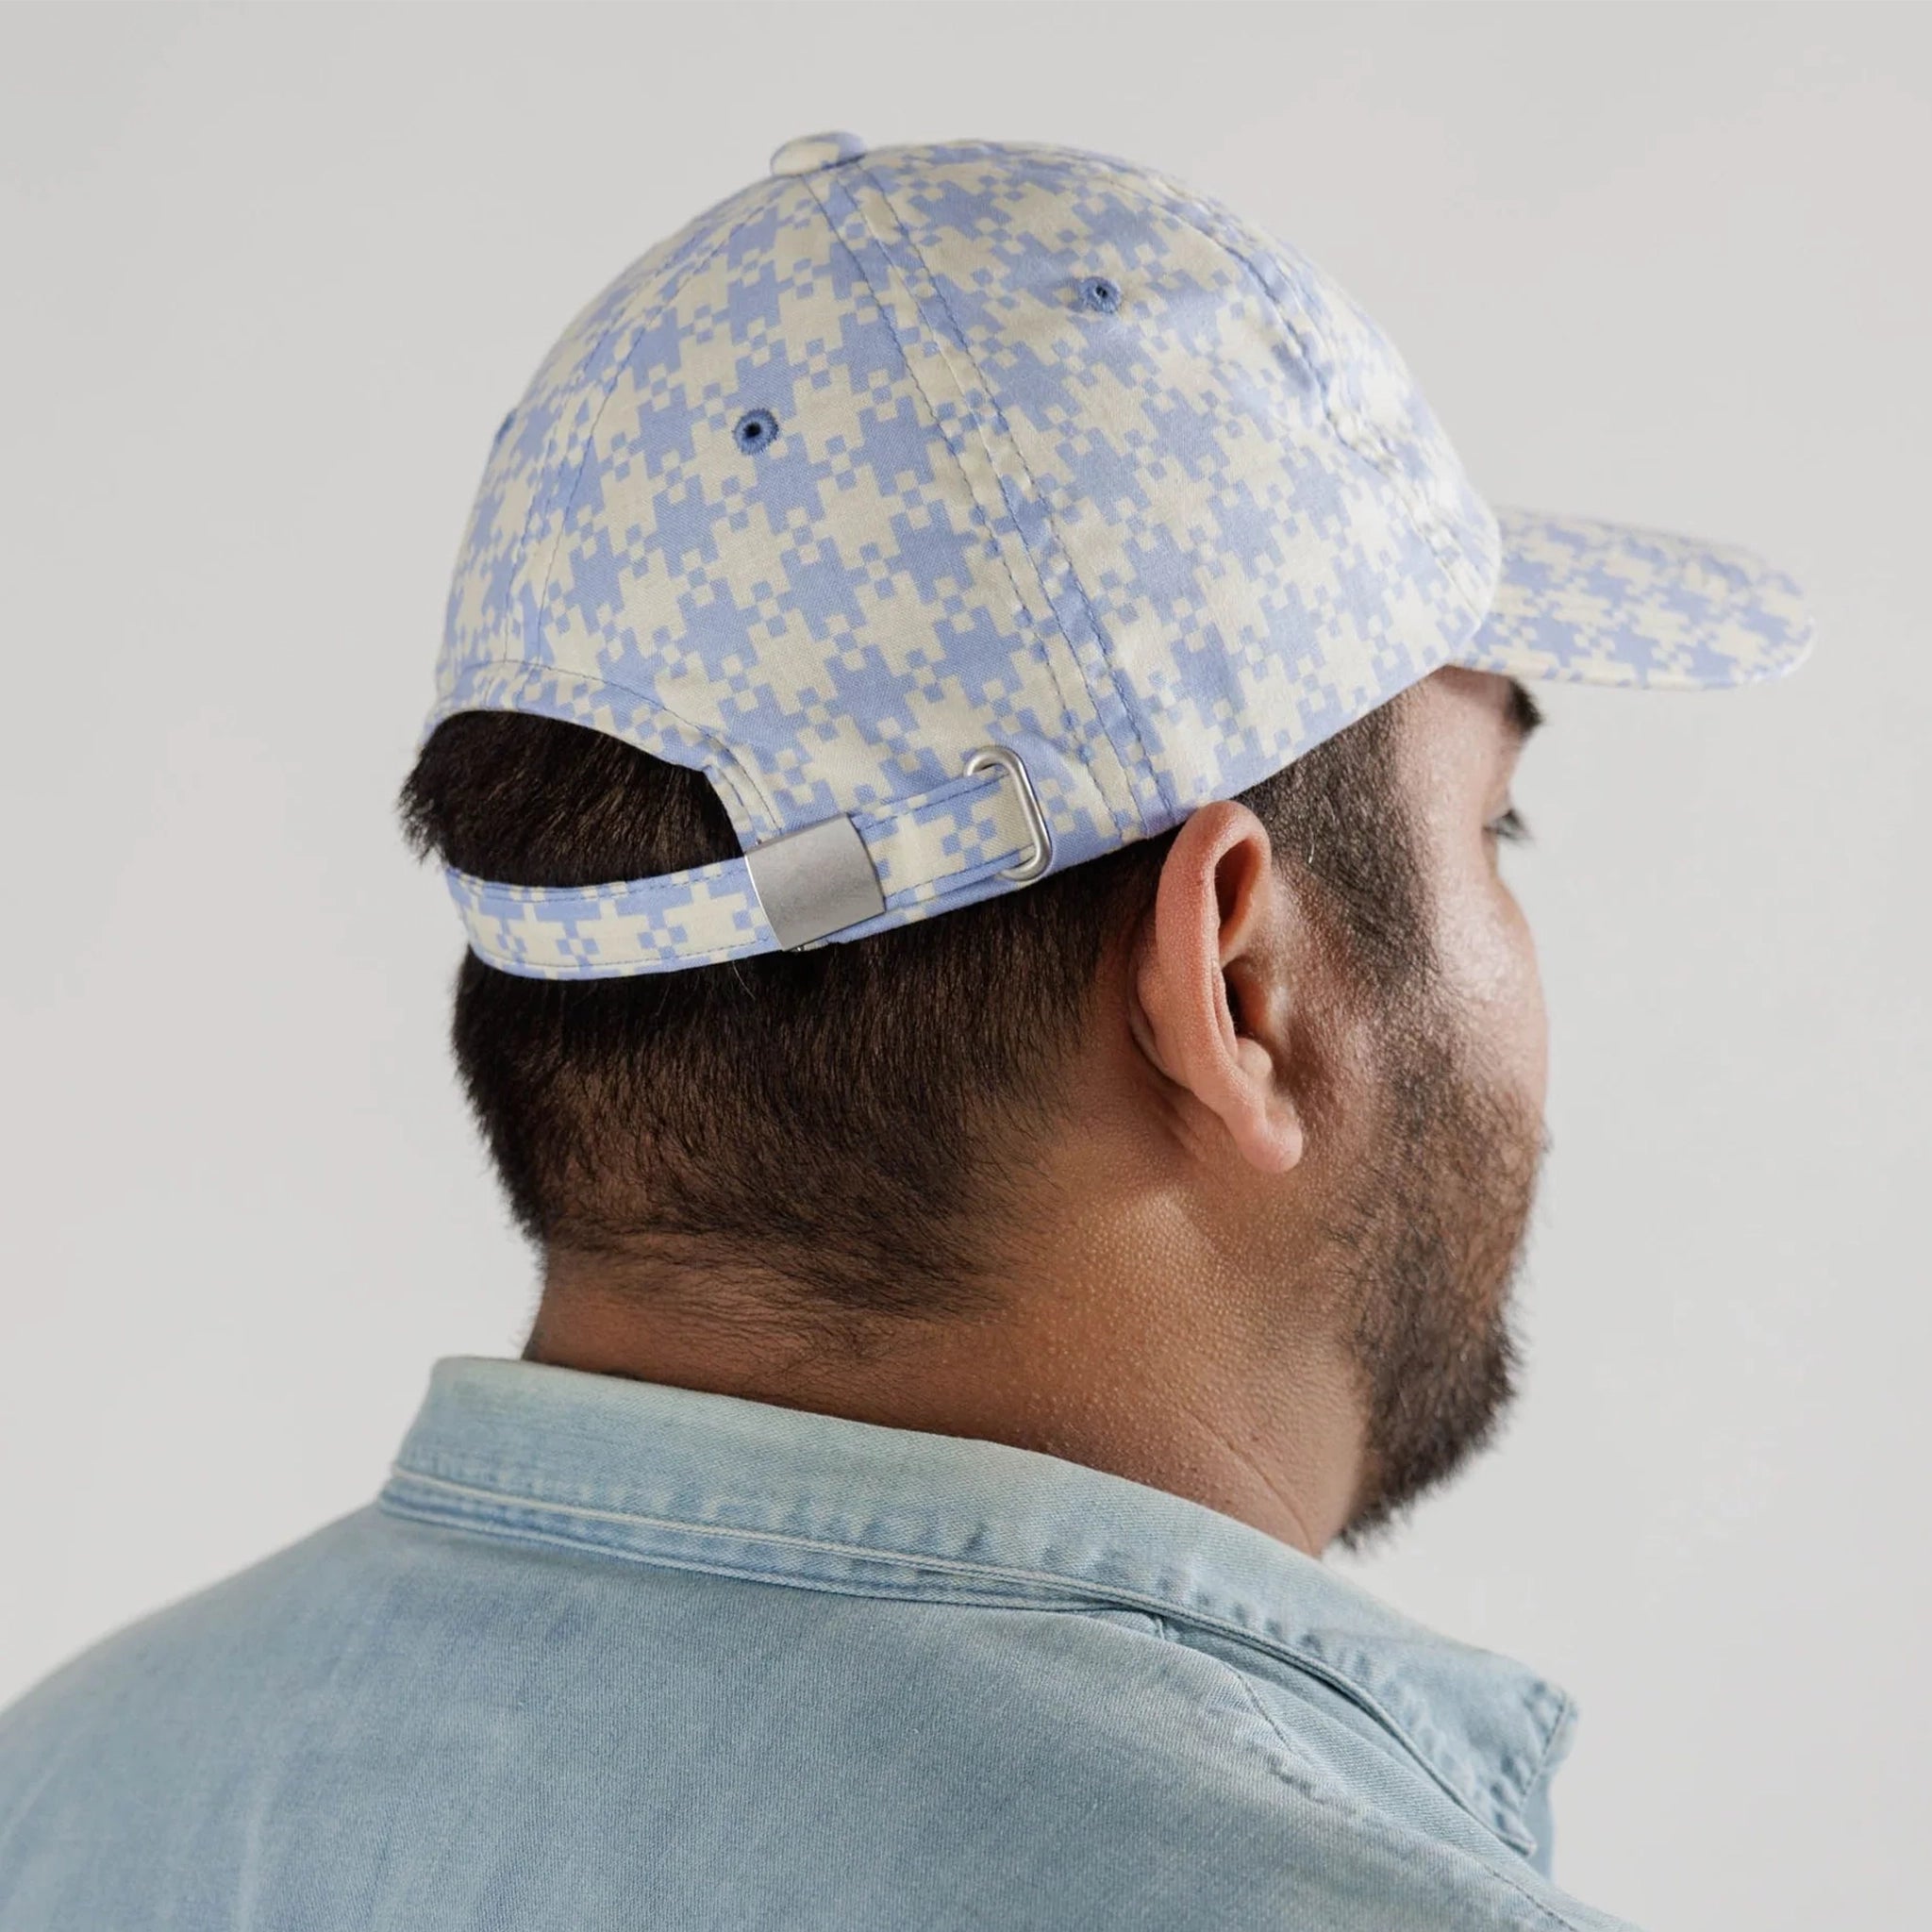 On a white background is a light blue and white gingham printed baseball hat.